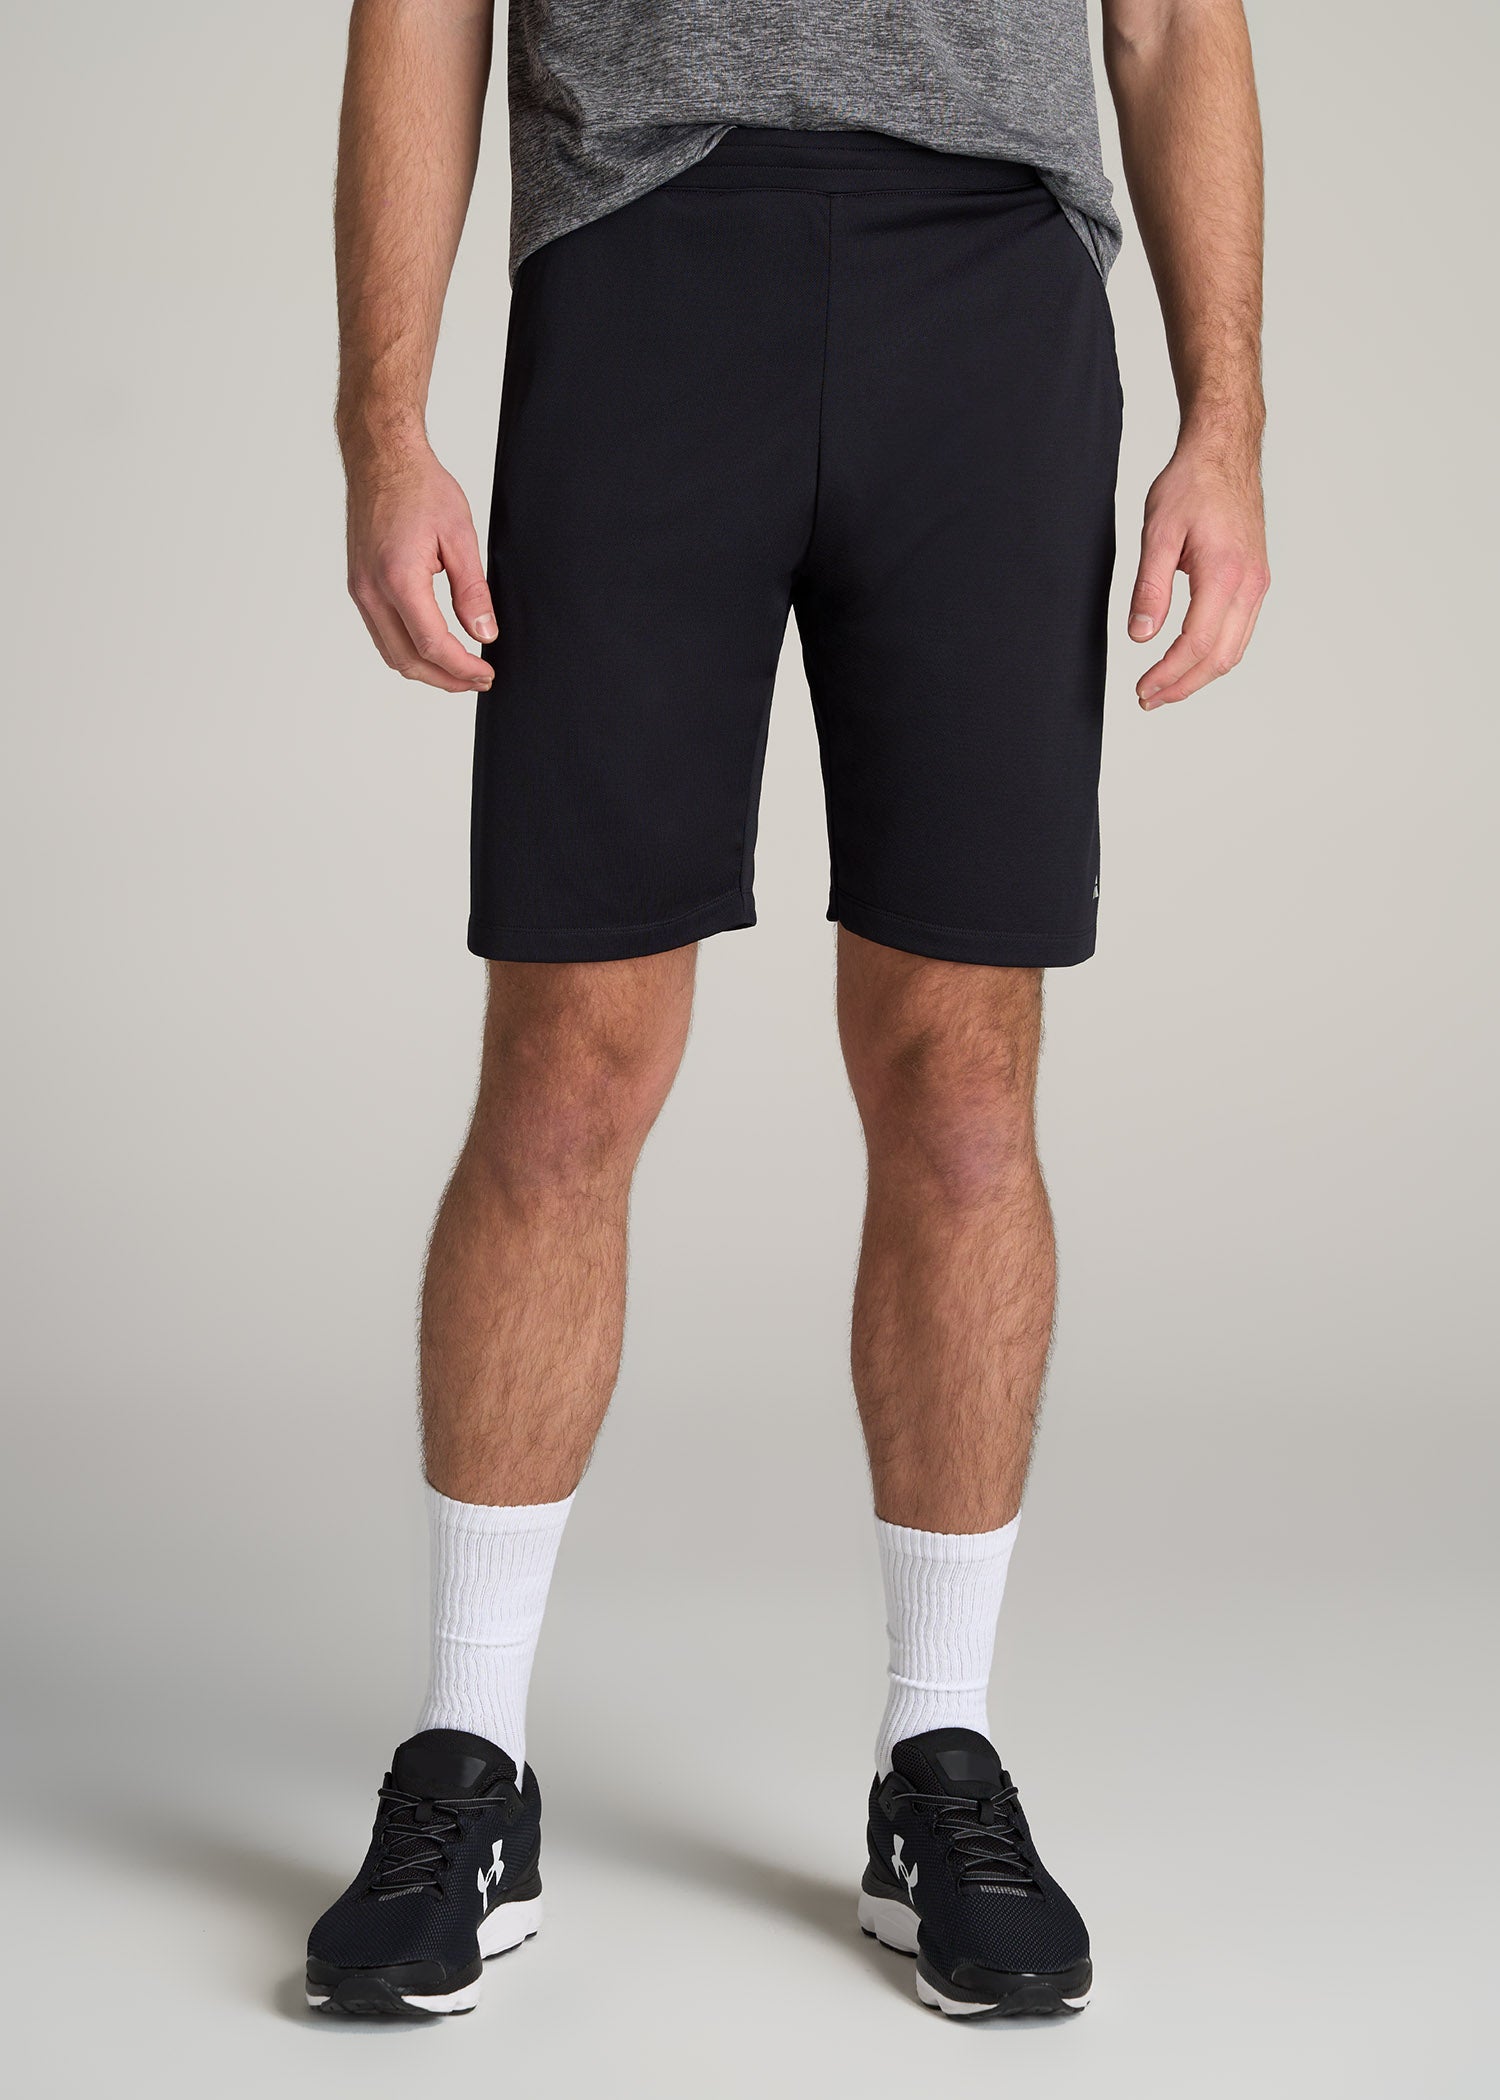 A.T. Performance Shorts